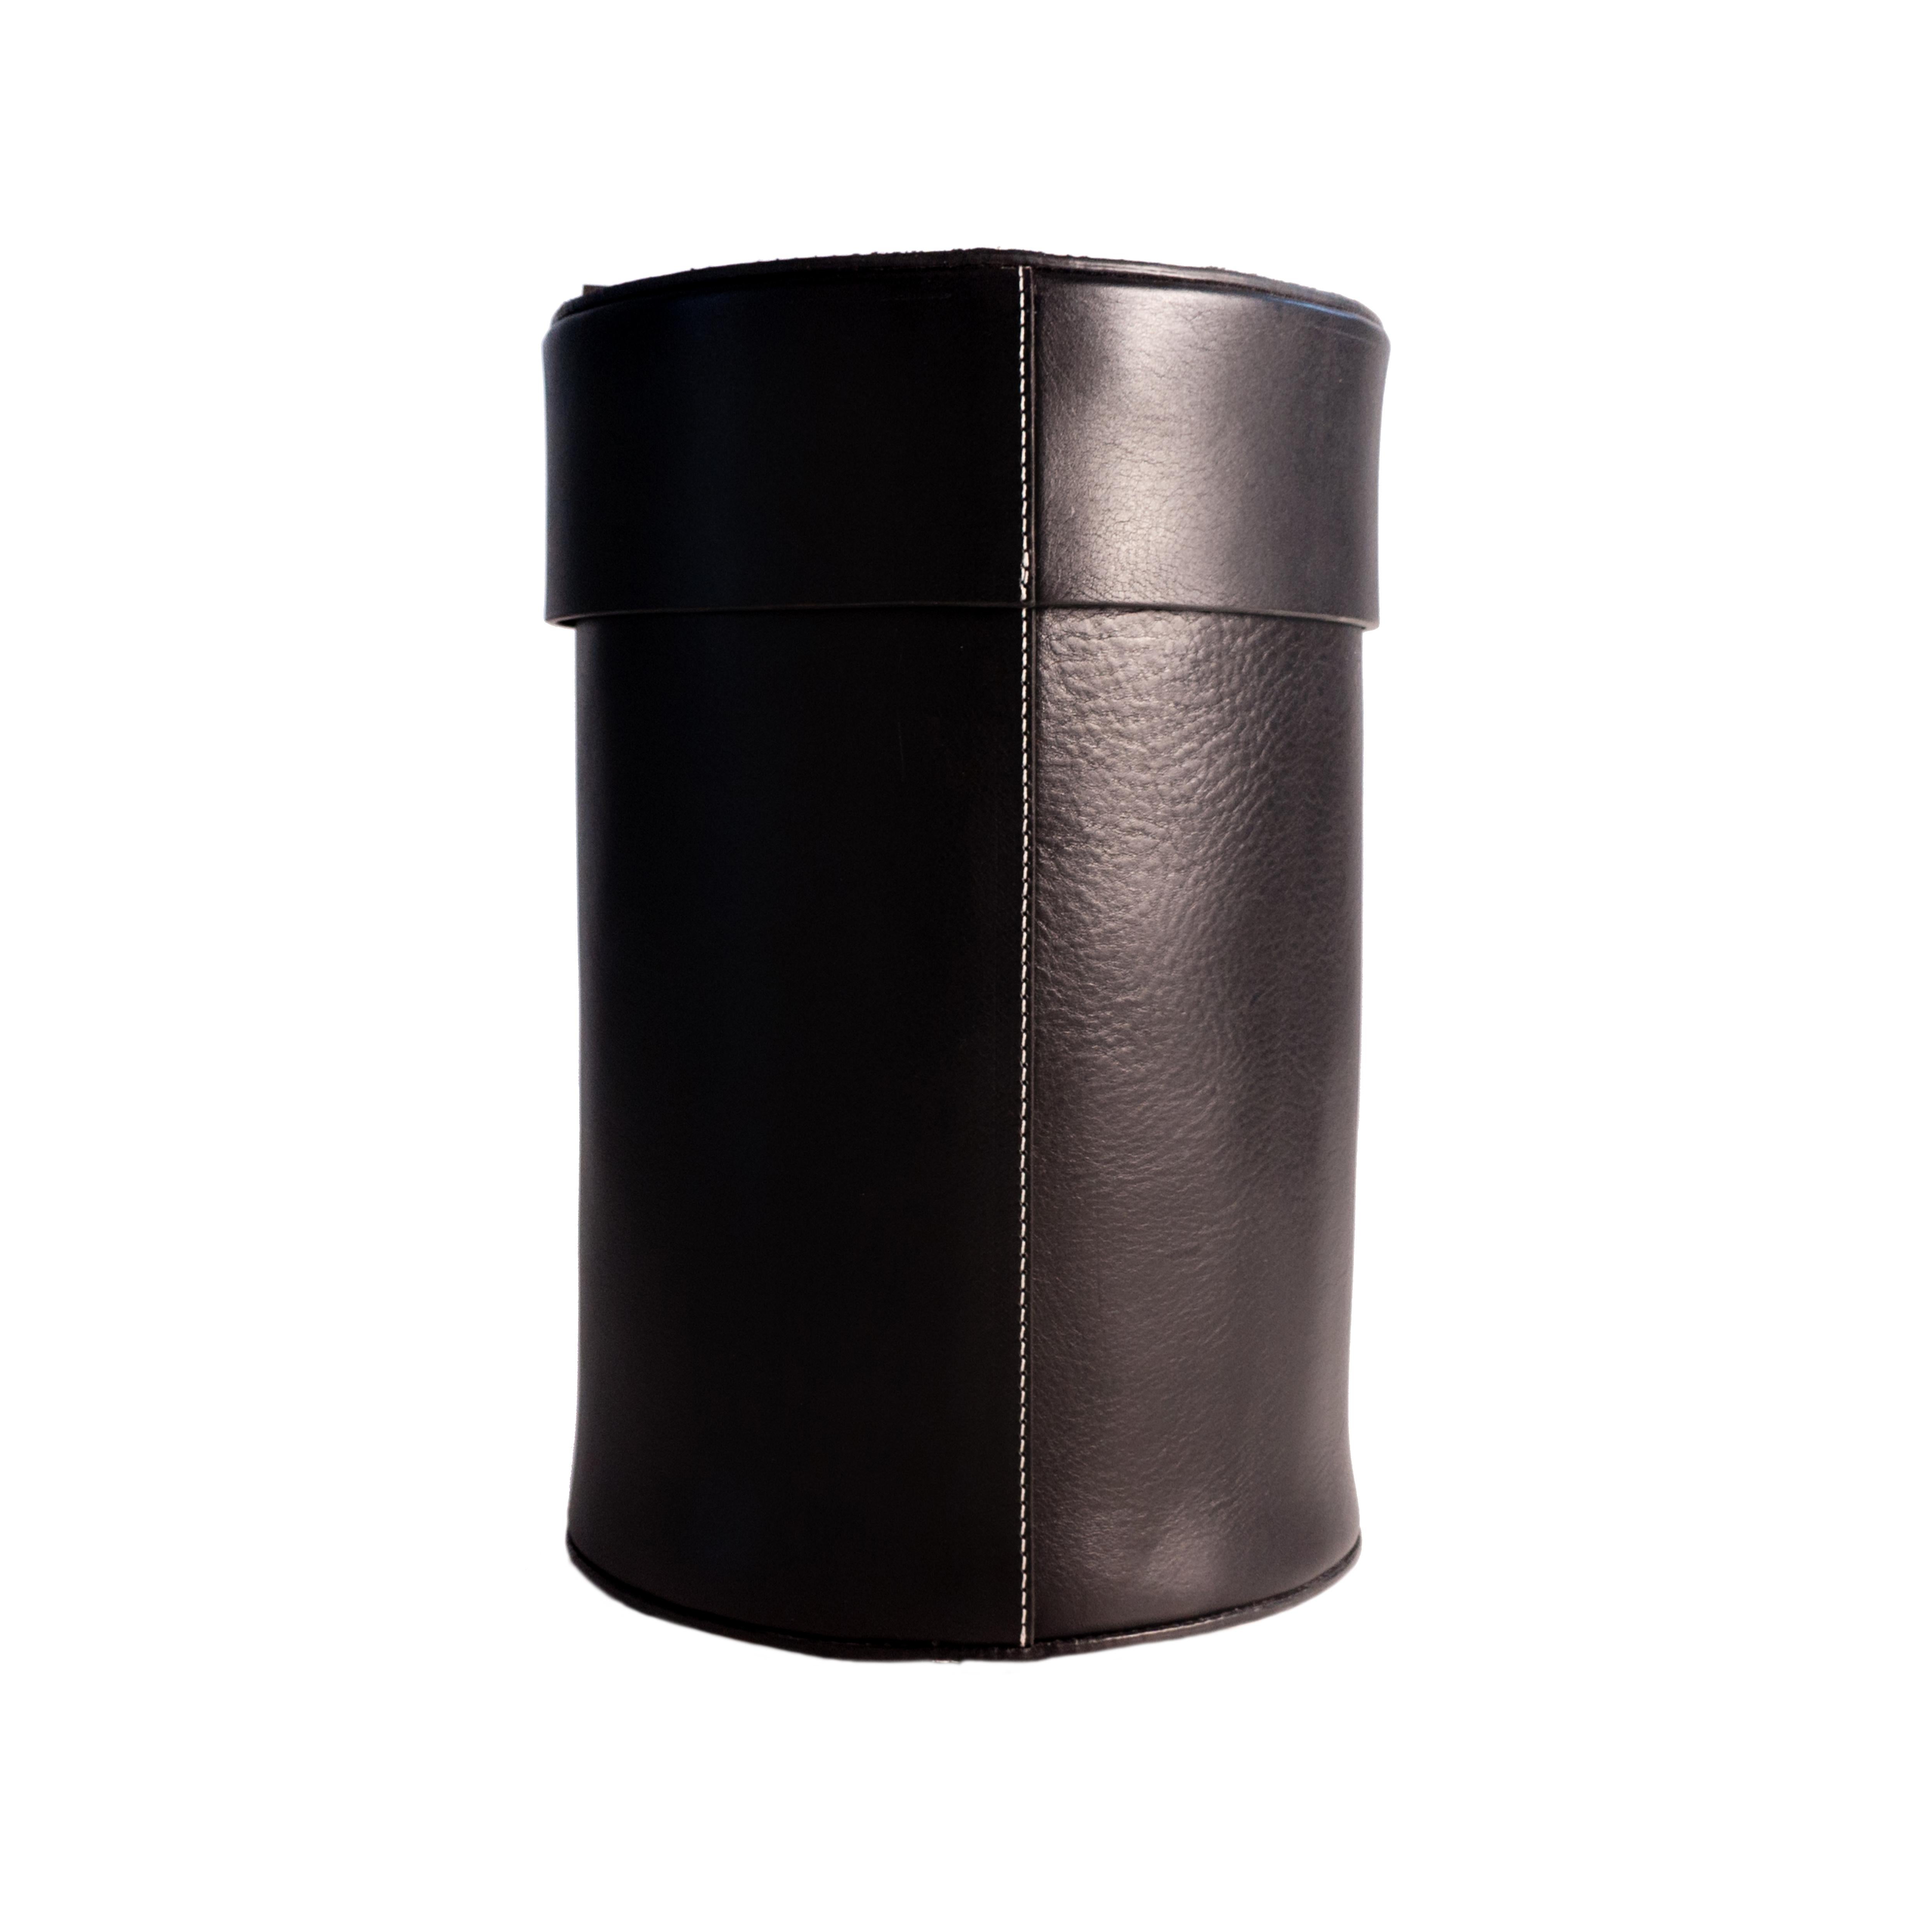 Hand-Crafted Luxury Paper Bin Handcrafted in Black Cowhide Leather with Brass Details For Sale